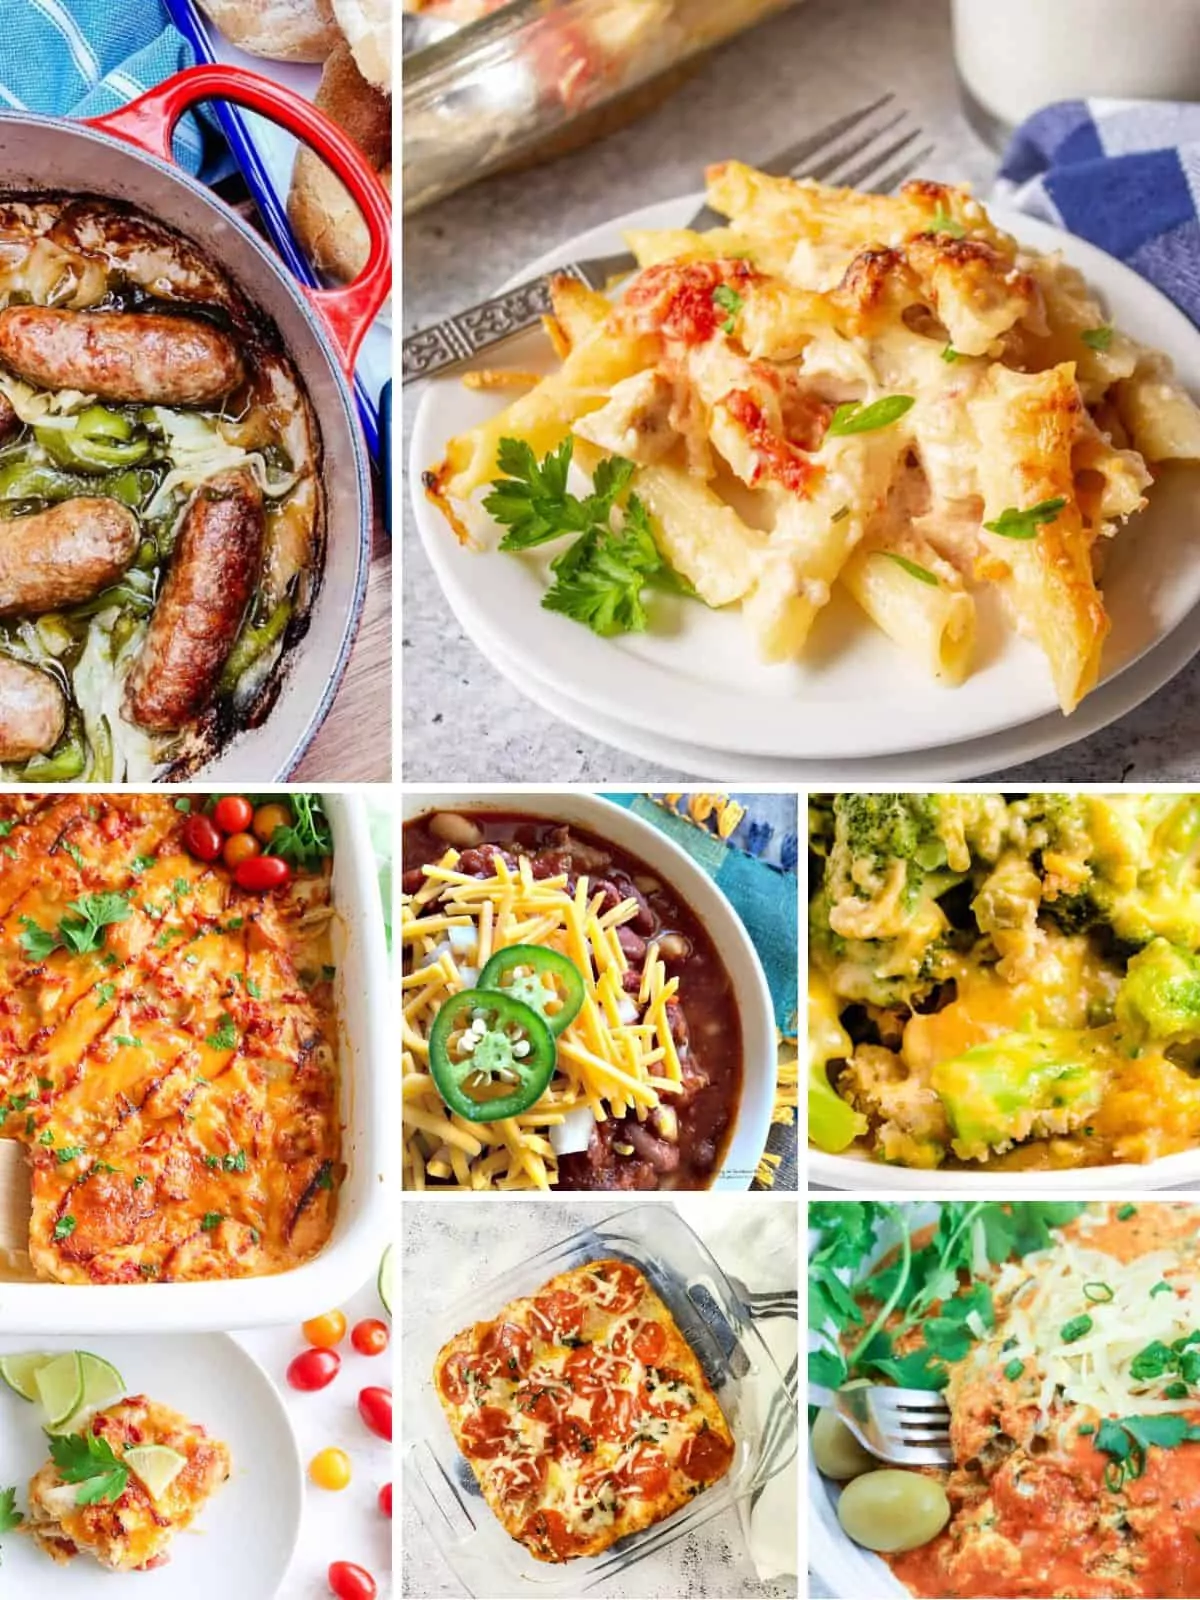 7 easy casserole recipes for Weekly Meal Plan.